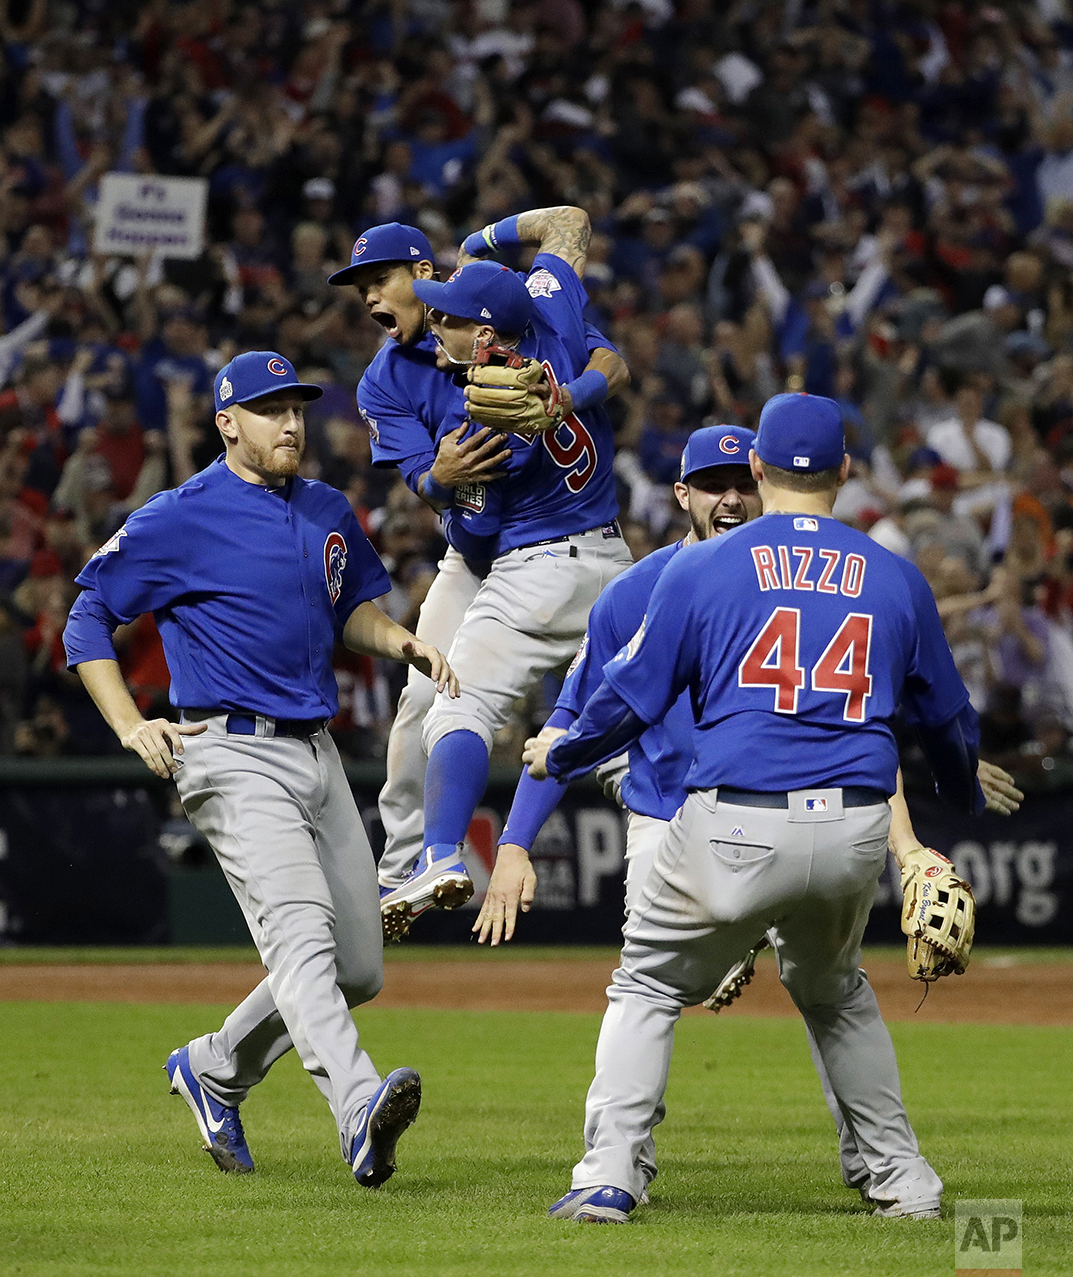  The Chicago Cubs celebrate after Game 7 of the Major League Baseball World Series against the Cleveland Indians on Nov. 3, 2016, in Cleveland. The Cubs won 8-7 in 10 innings to win the series 4-3. (AP Photo/David J. Phillip) 